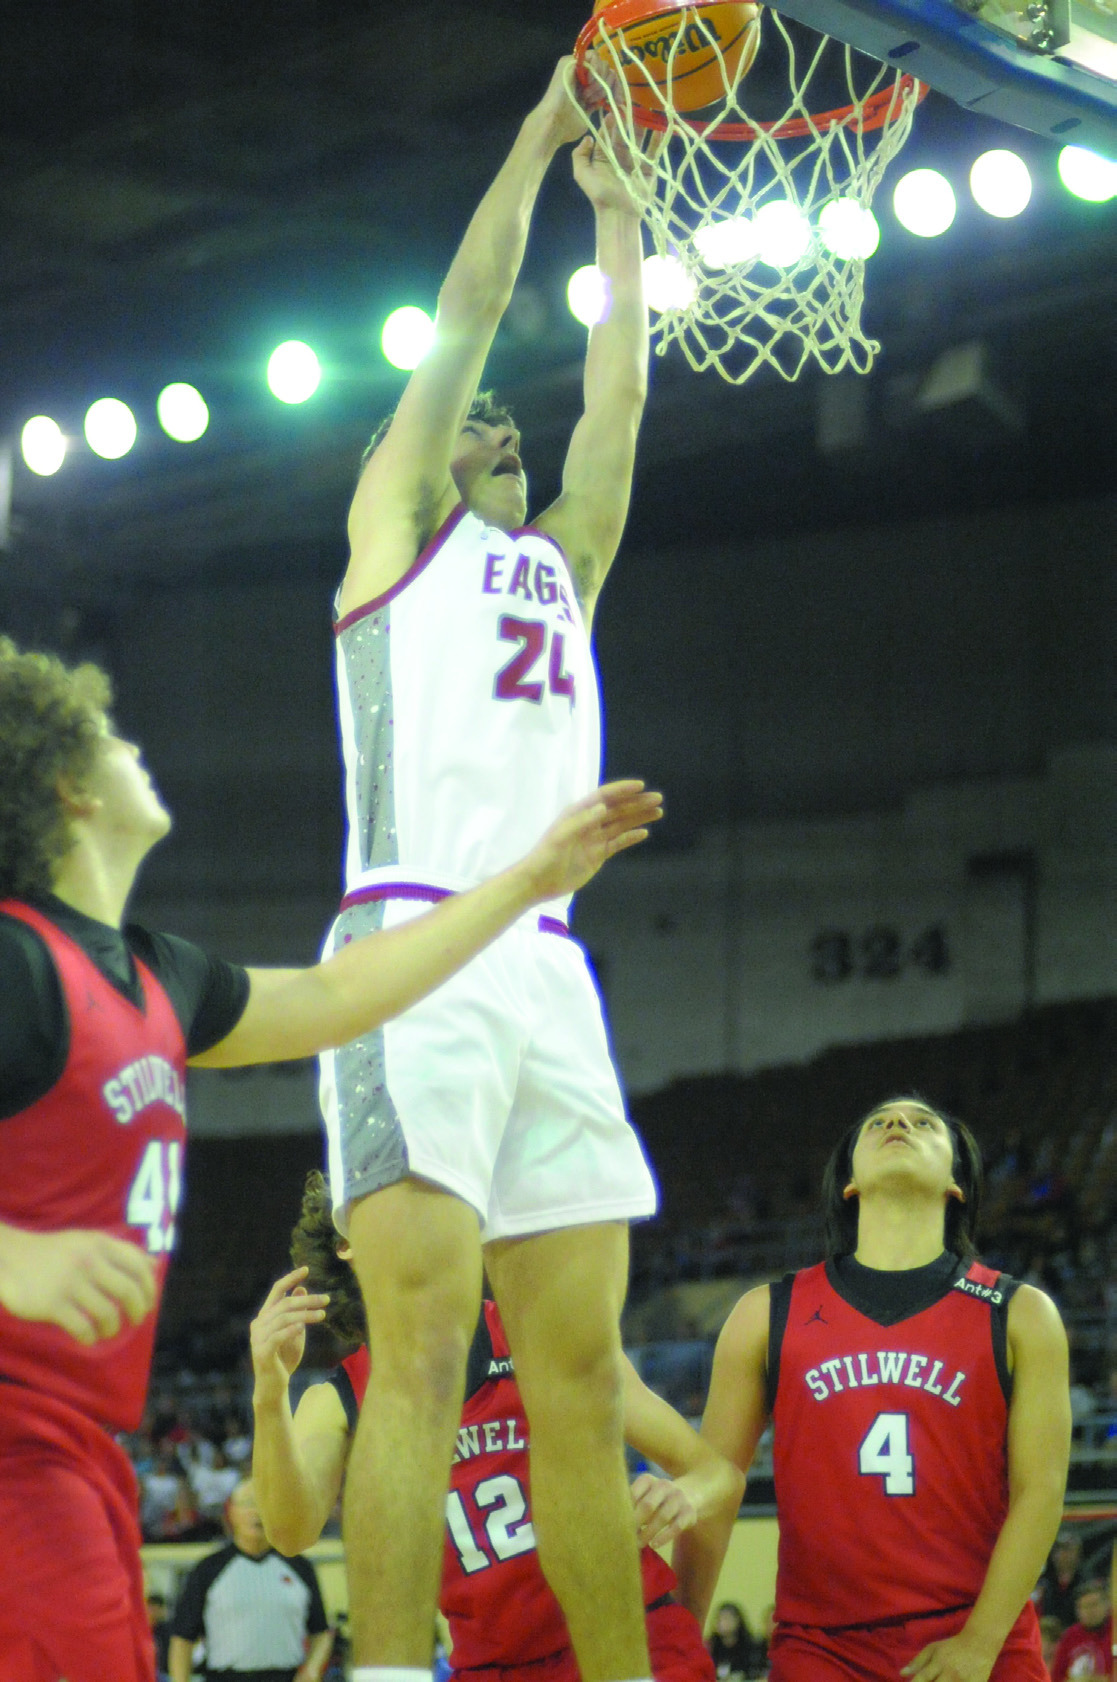 Tate Sage dunks the ball during Thursday’s game against Stilwell. He scored 12 points the game. Josh Burton/WDN